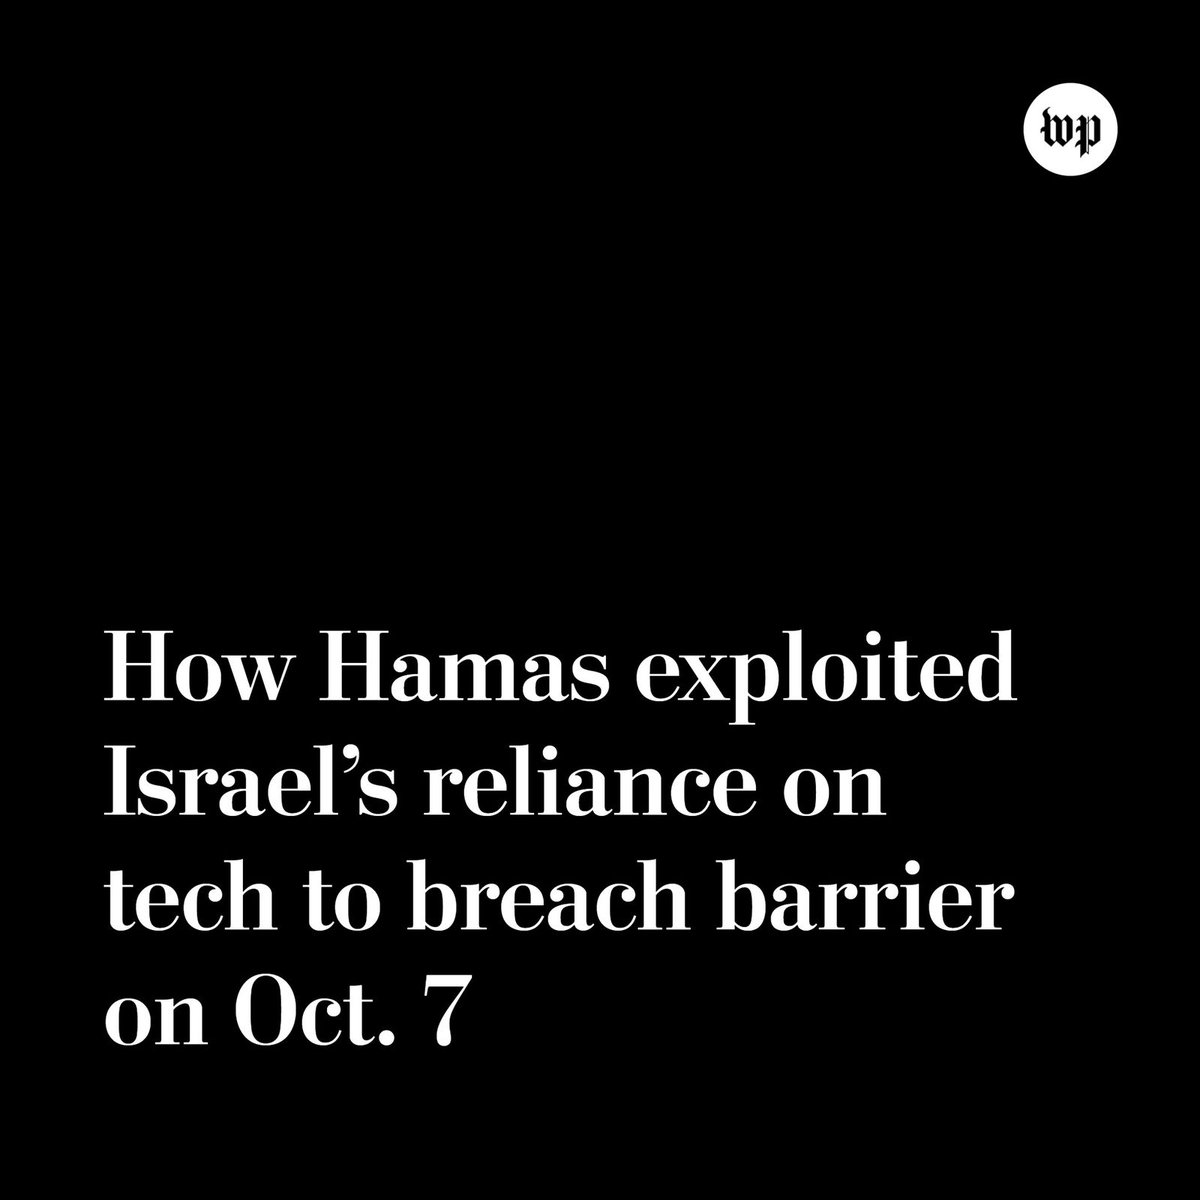 Israel’s military said in December 2021 that a high-tech upgrade to the barrier that surrounded the Gaza Strip would protect nearby Israeli residents from the threat of violent militants. The upgrade cost $1 billion and took three years to complete. wapo.st/3swP1Wi